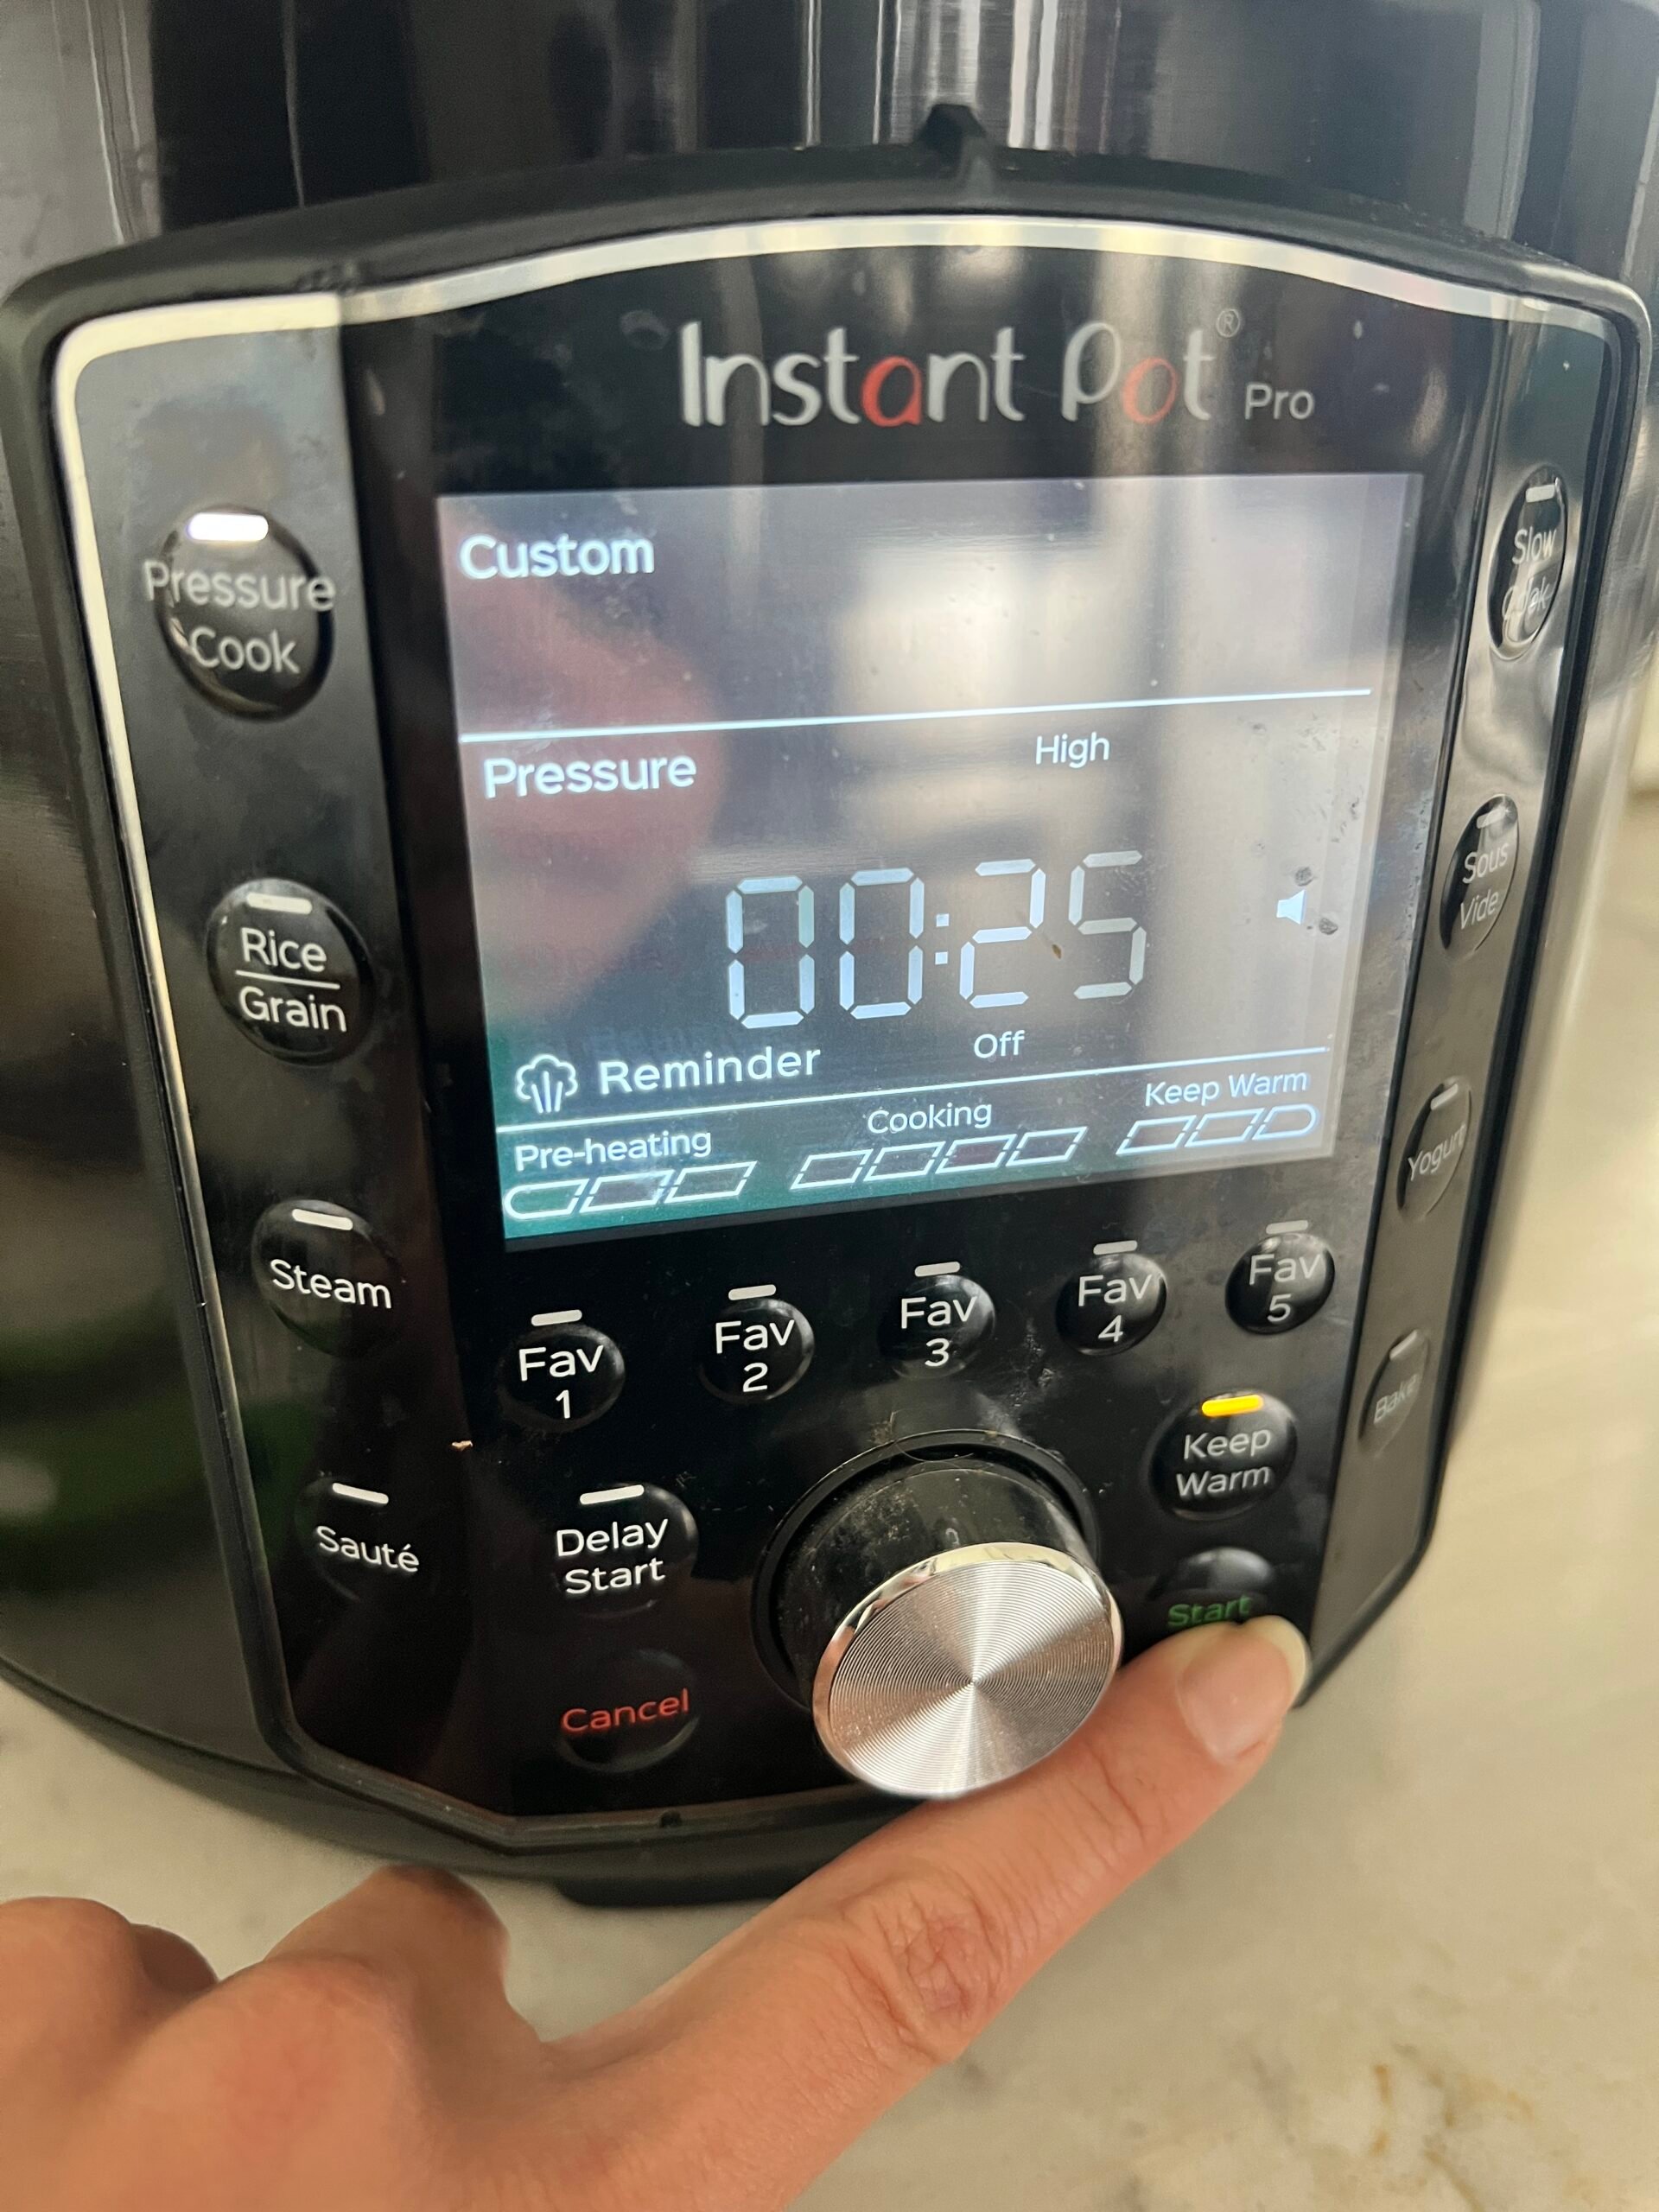 Process for adjusting settings for Instant Pot